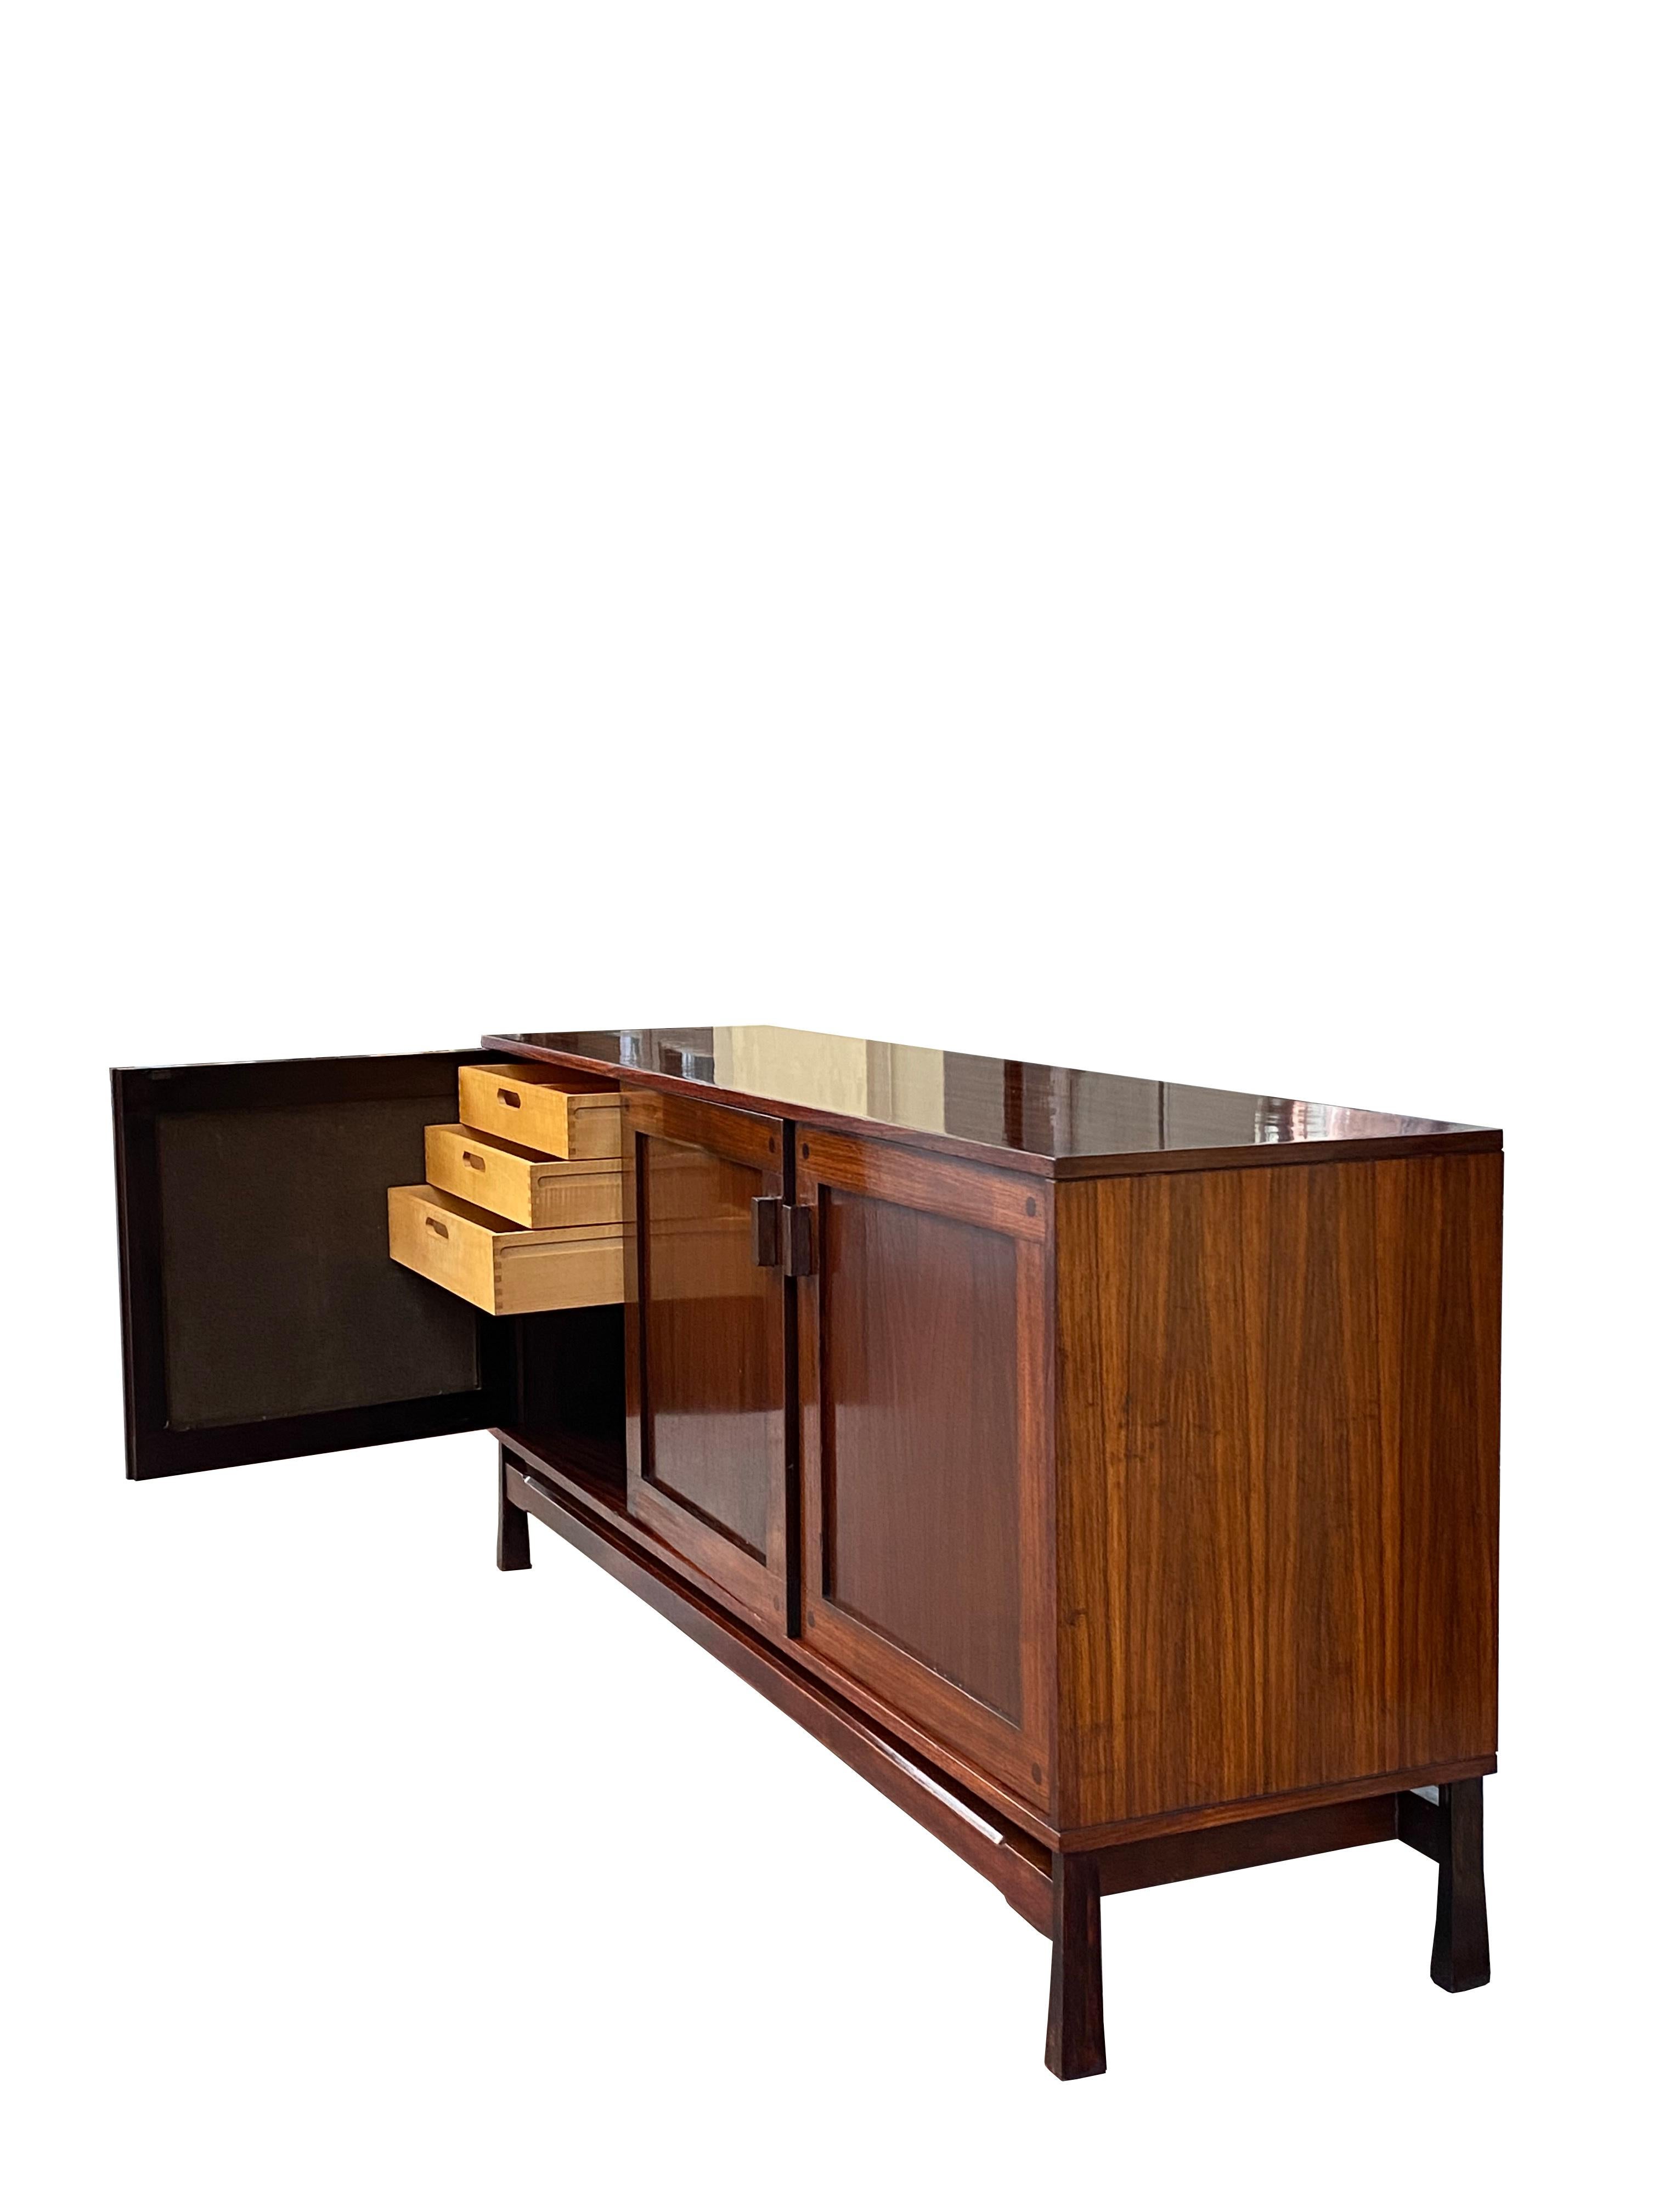 Wooden Sideboard, Italian Manufacture, Saima Pavia production 1960 In Good Condition For Sale In Naples, IT